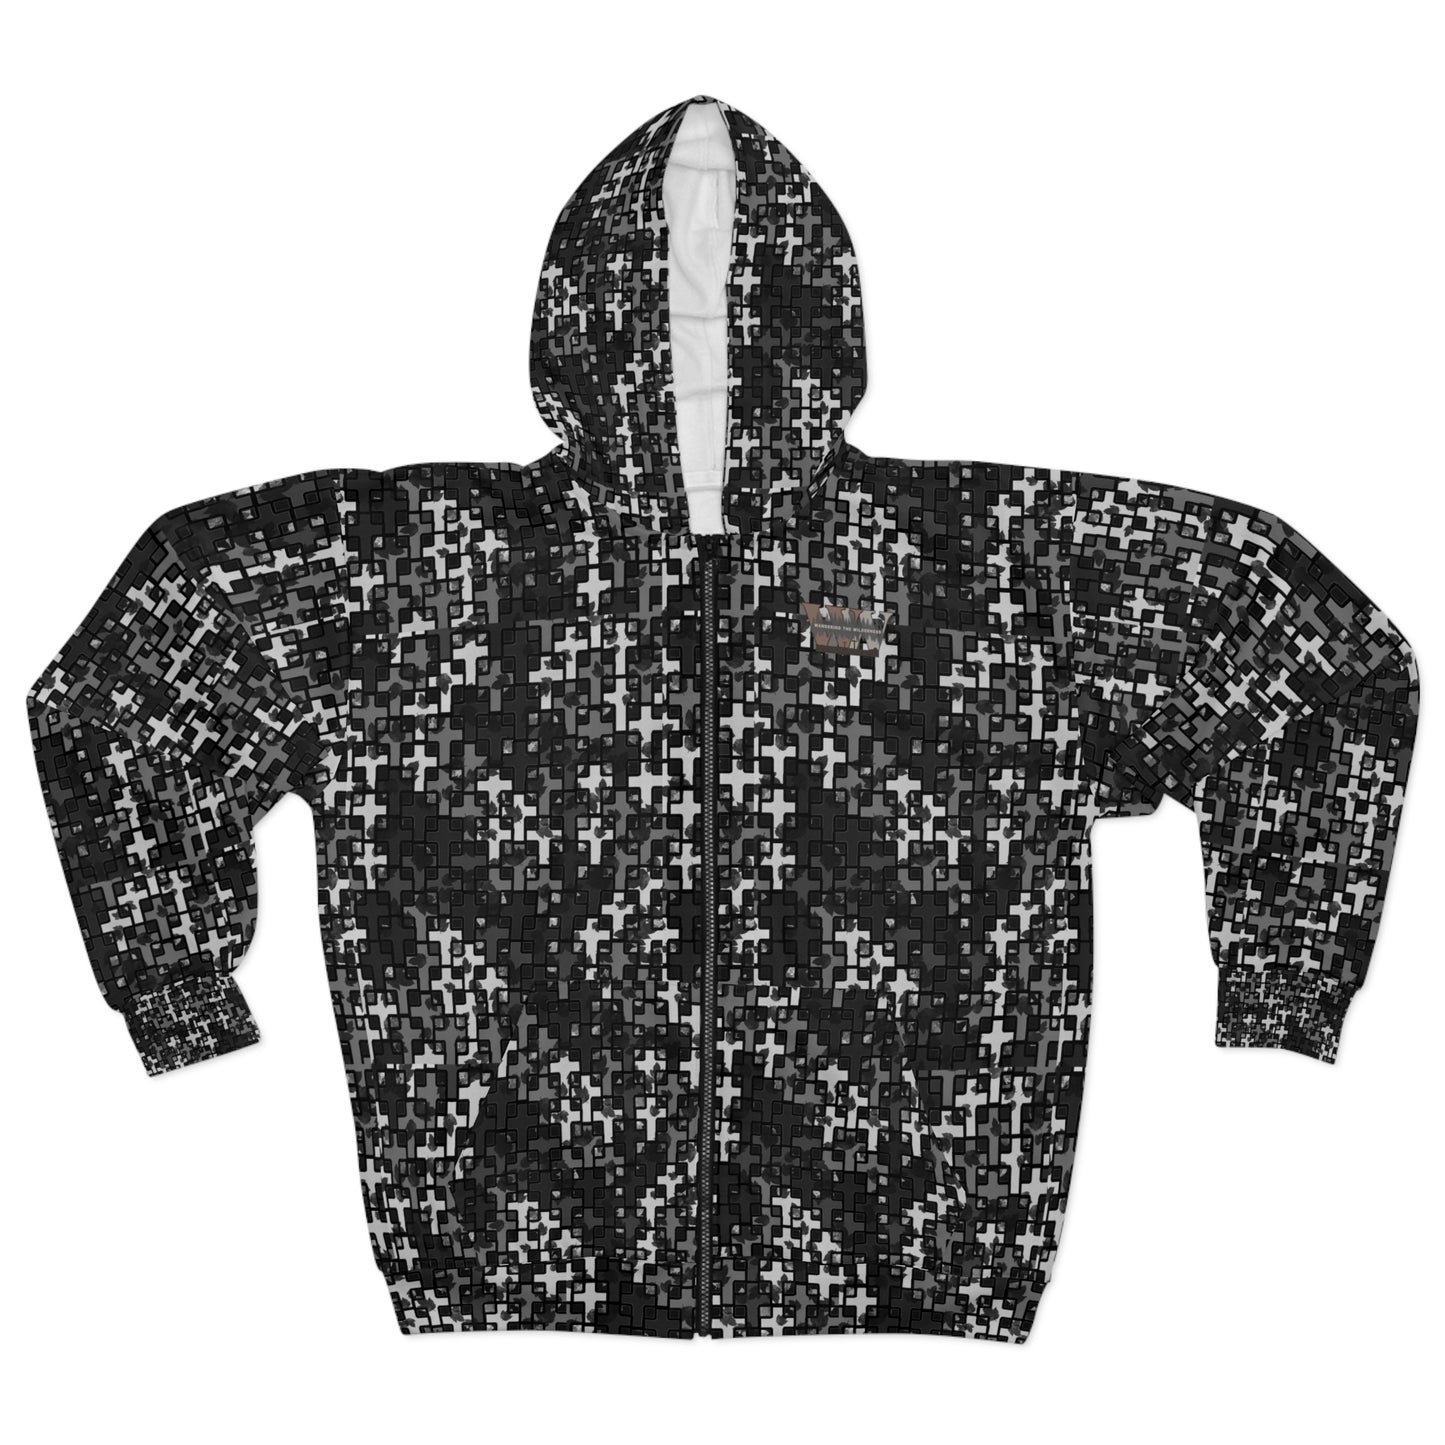 Wandering the Wilderness urban cross camo…Zippered fleece hooded jacket… Proudly made and printed in the USA